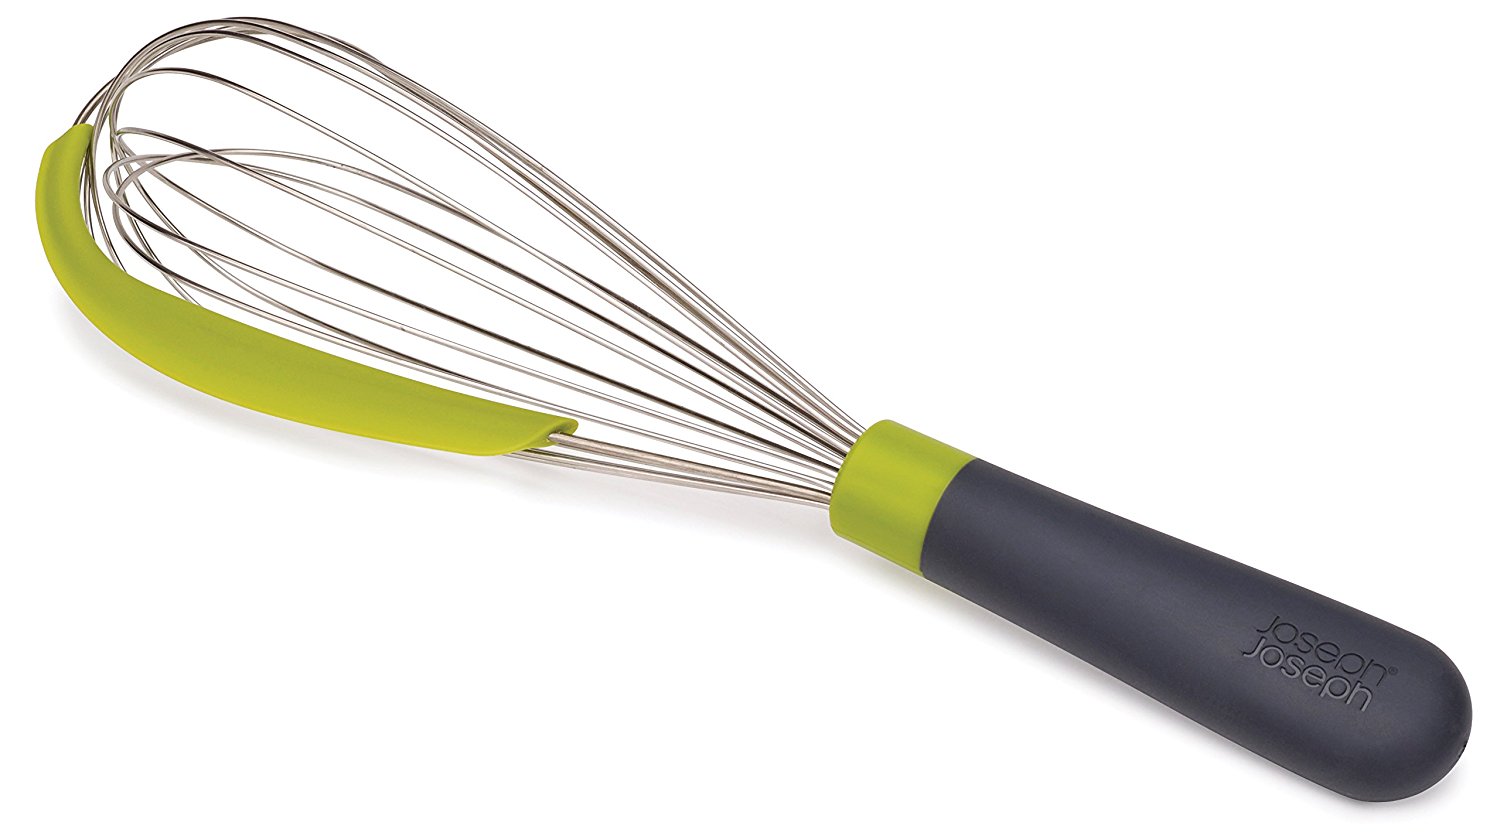 Joseph Joseph 20056 Whiskle 2-in-1 Whisk with Integrated Bowl Scraper,  Green – Nicole the Nomad